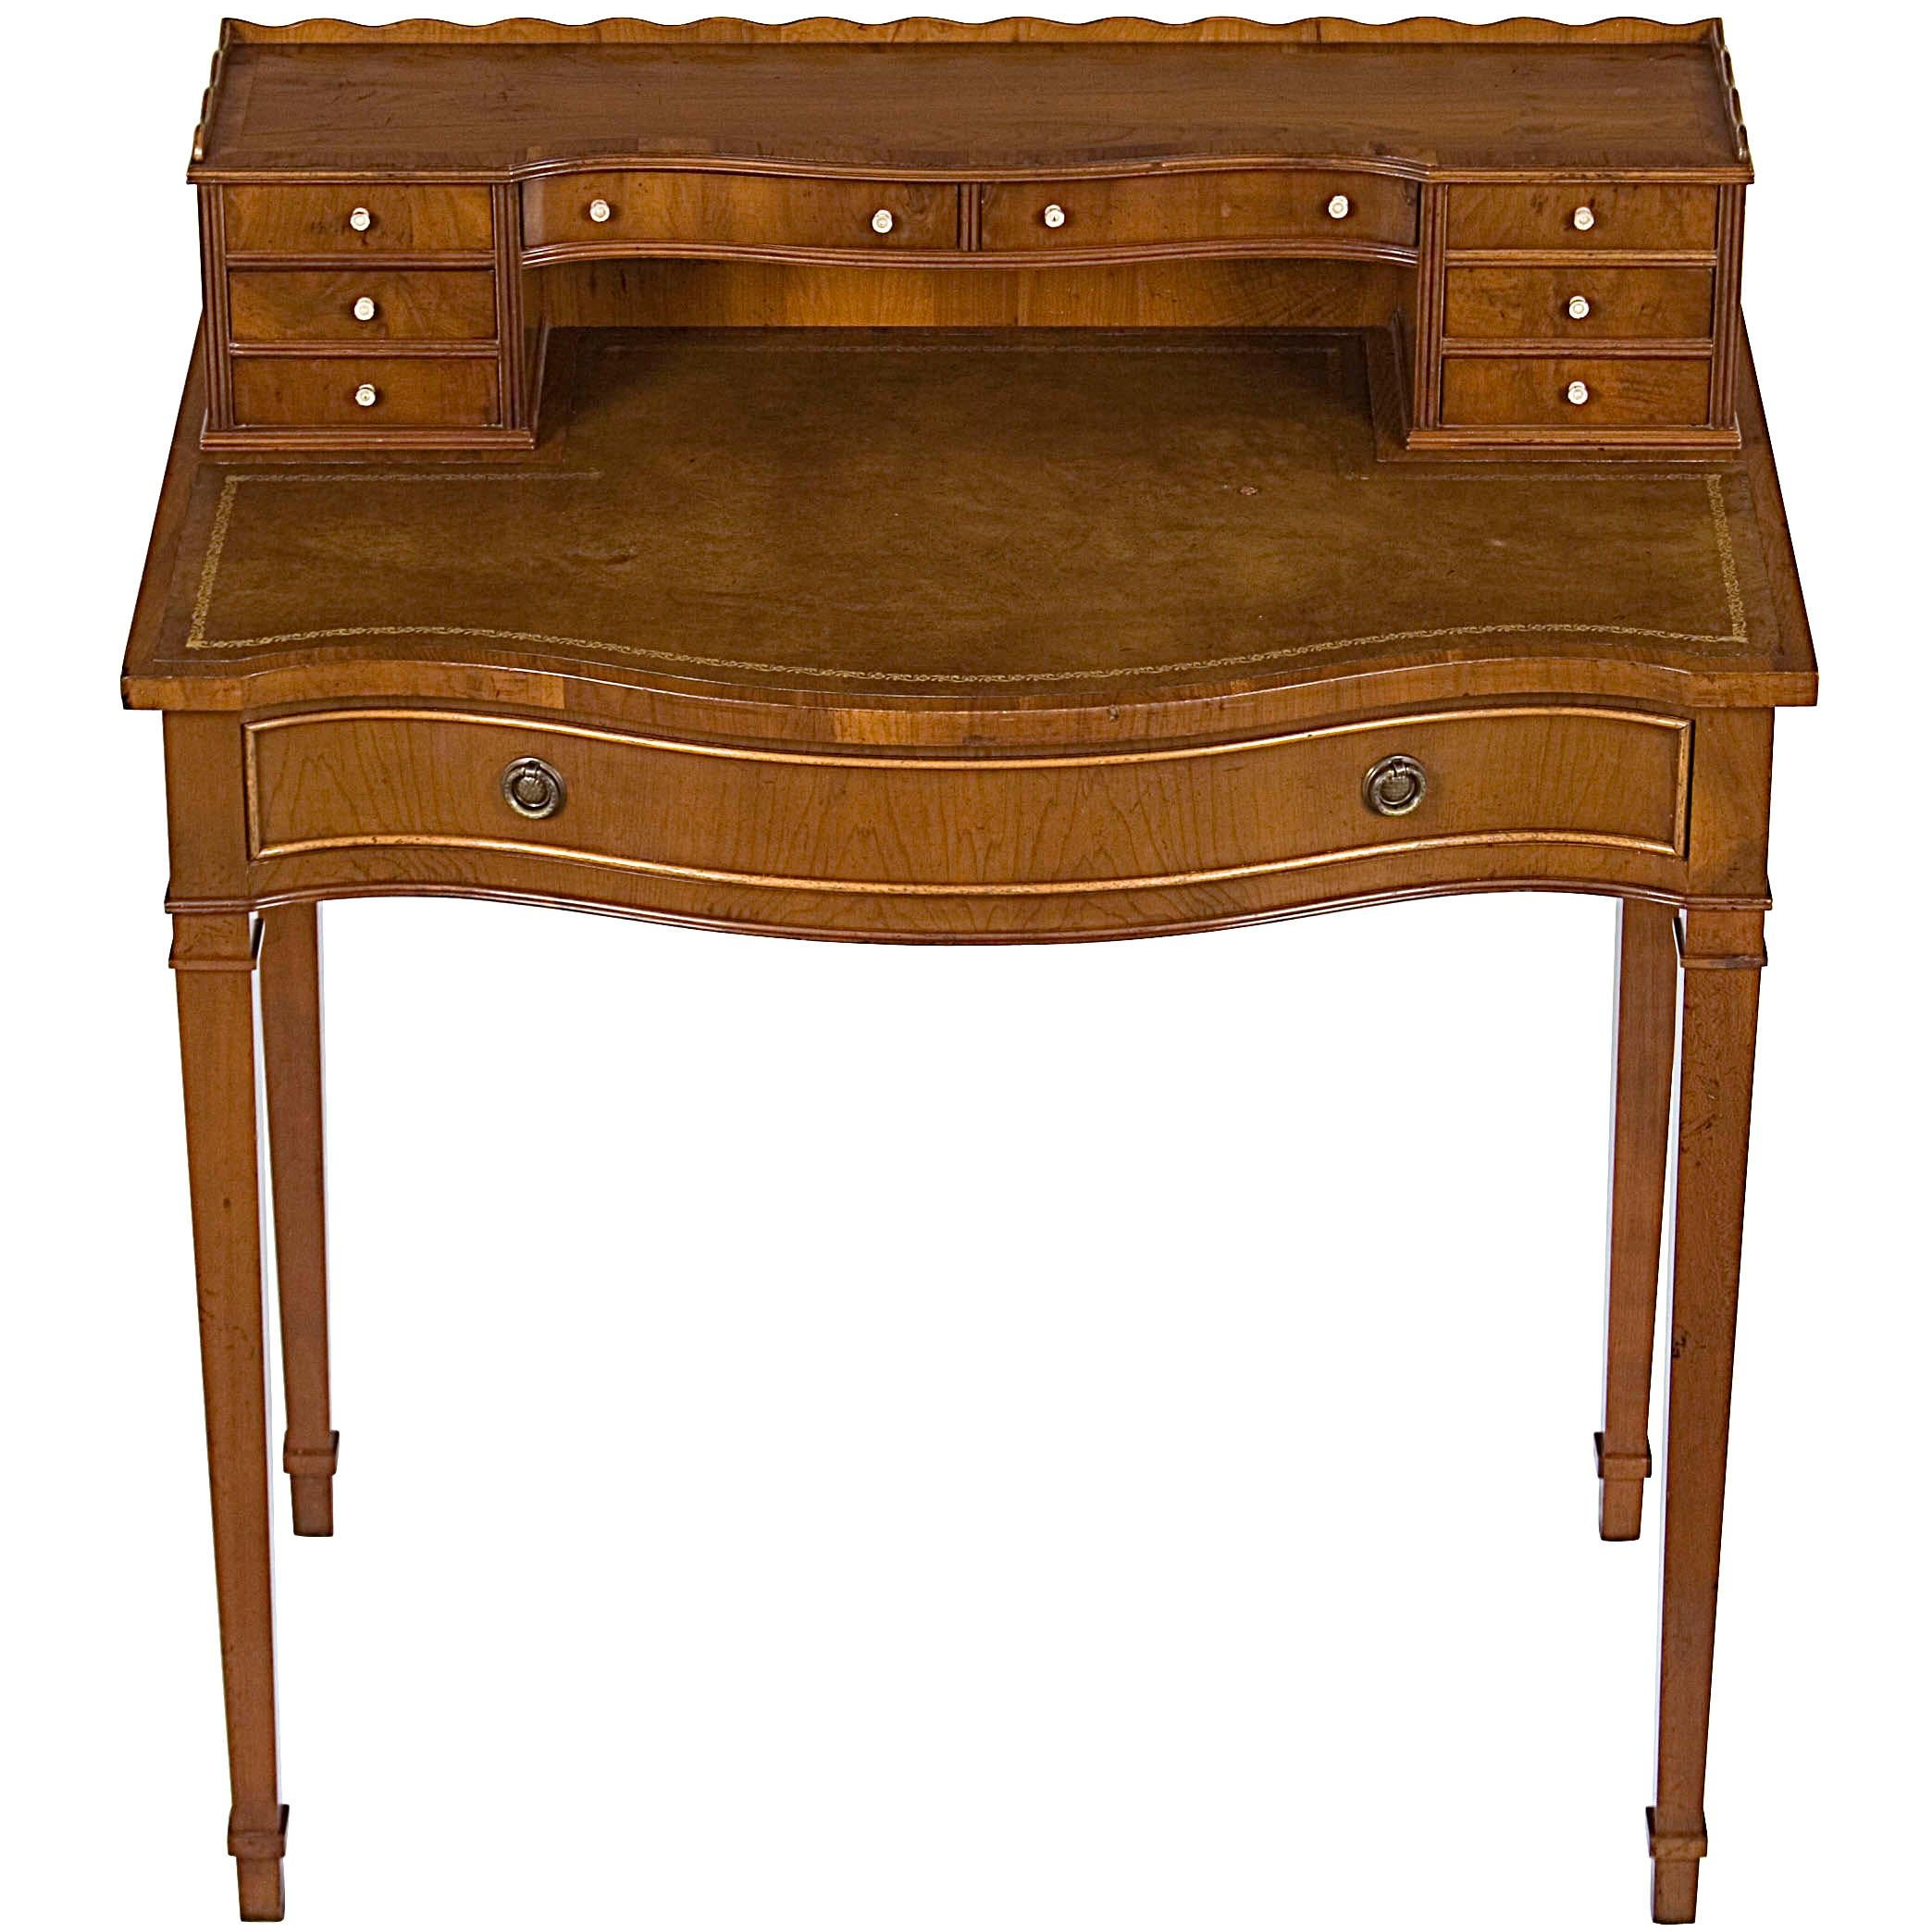 Small Yew Wood Leather Top Regency Style Writing Table Desk with Drawers